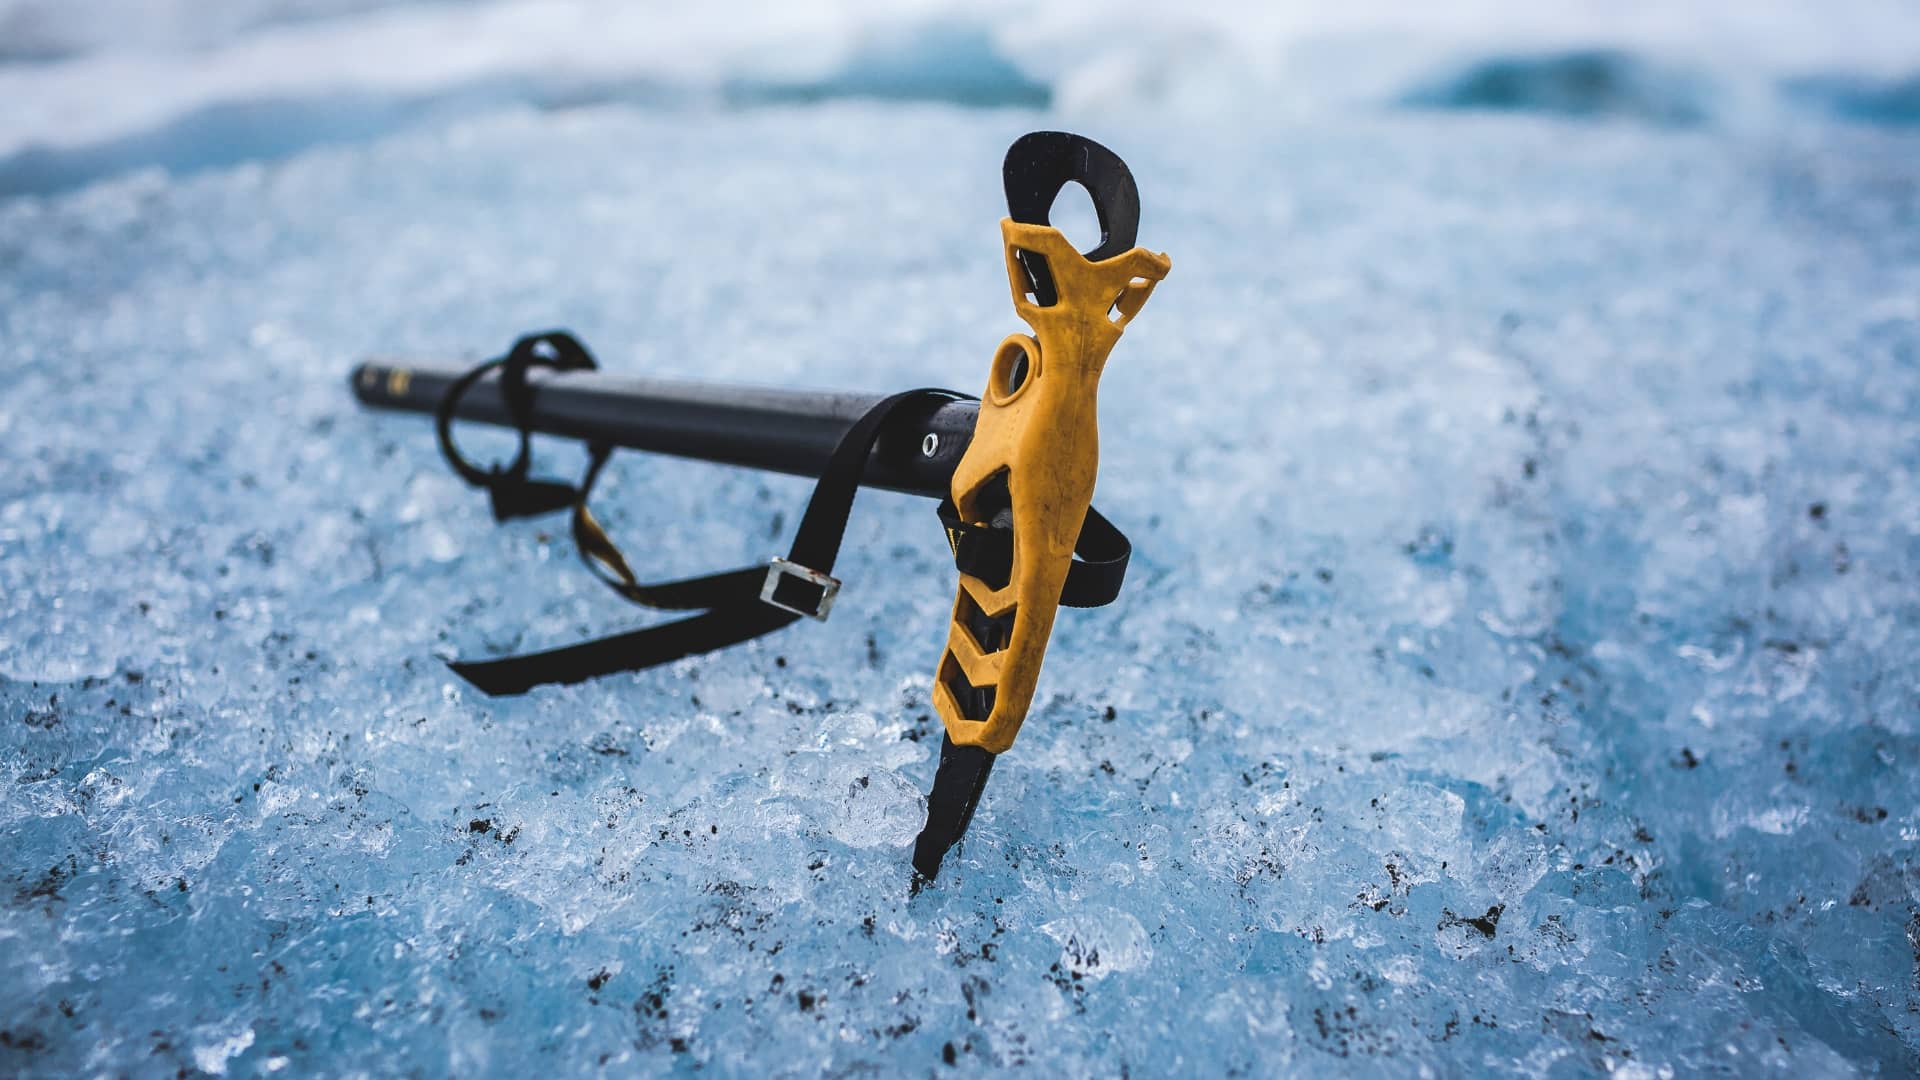 Ice Axe Review: A Comprehensive Assessment of Performance and Durability